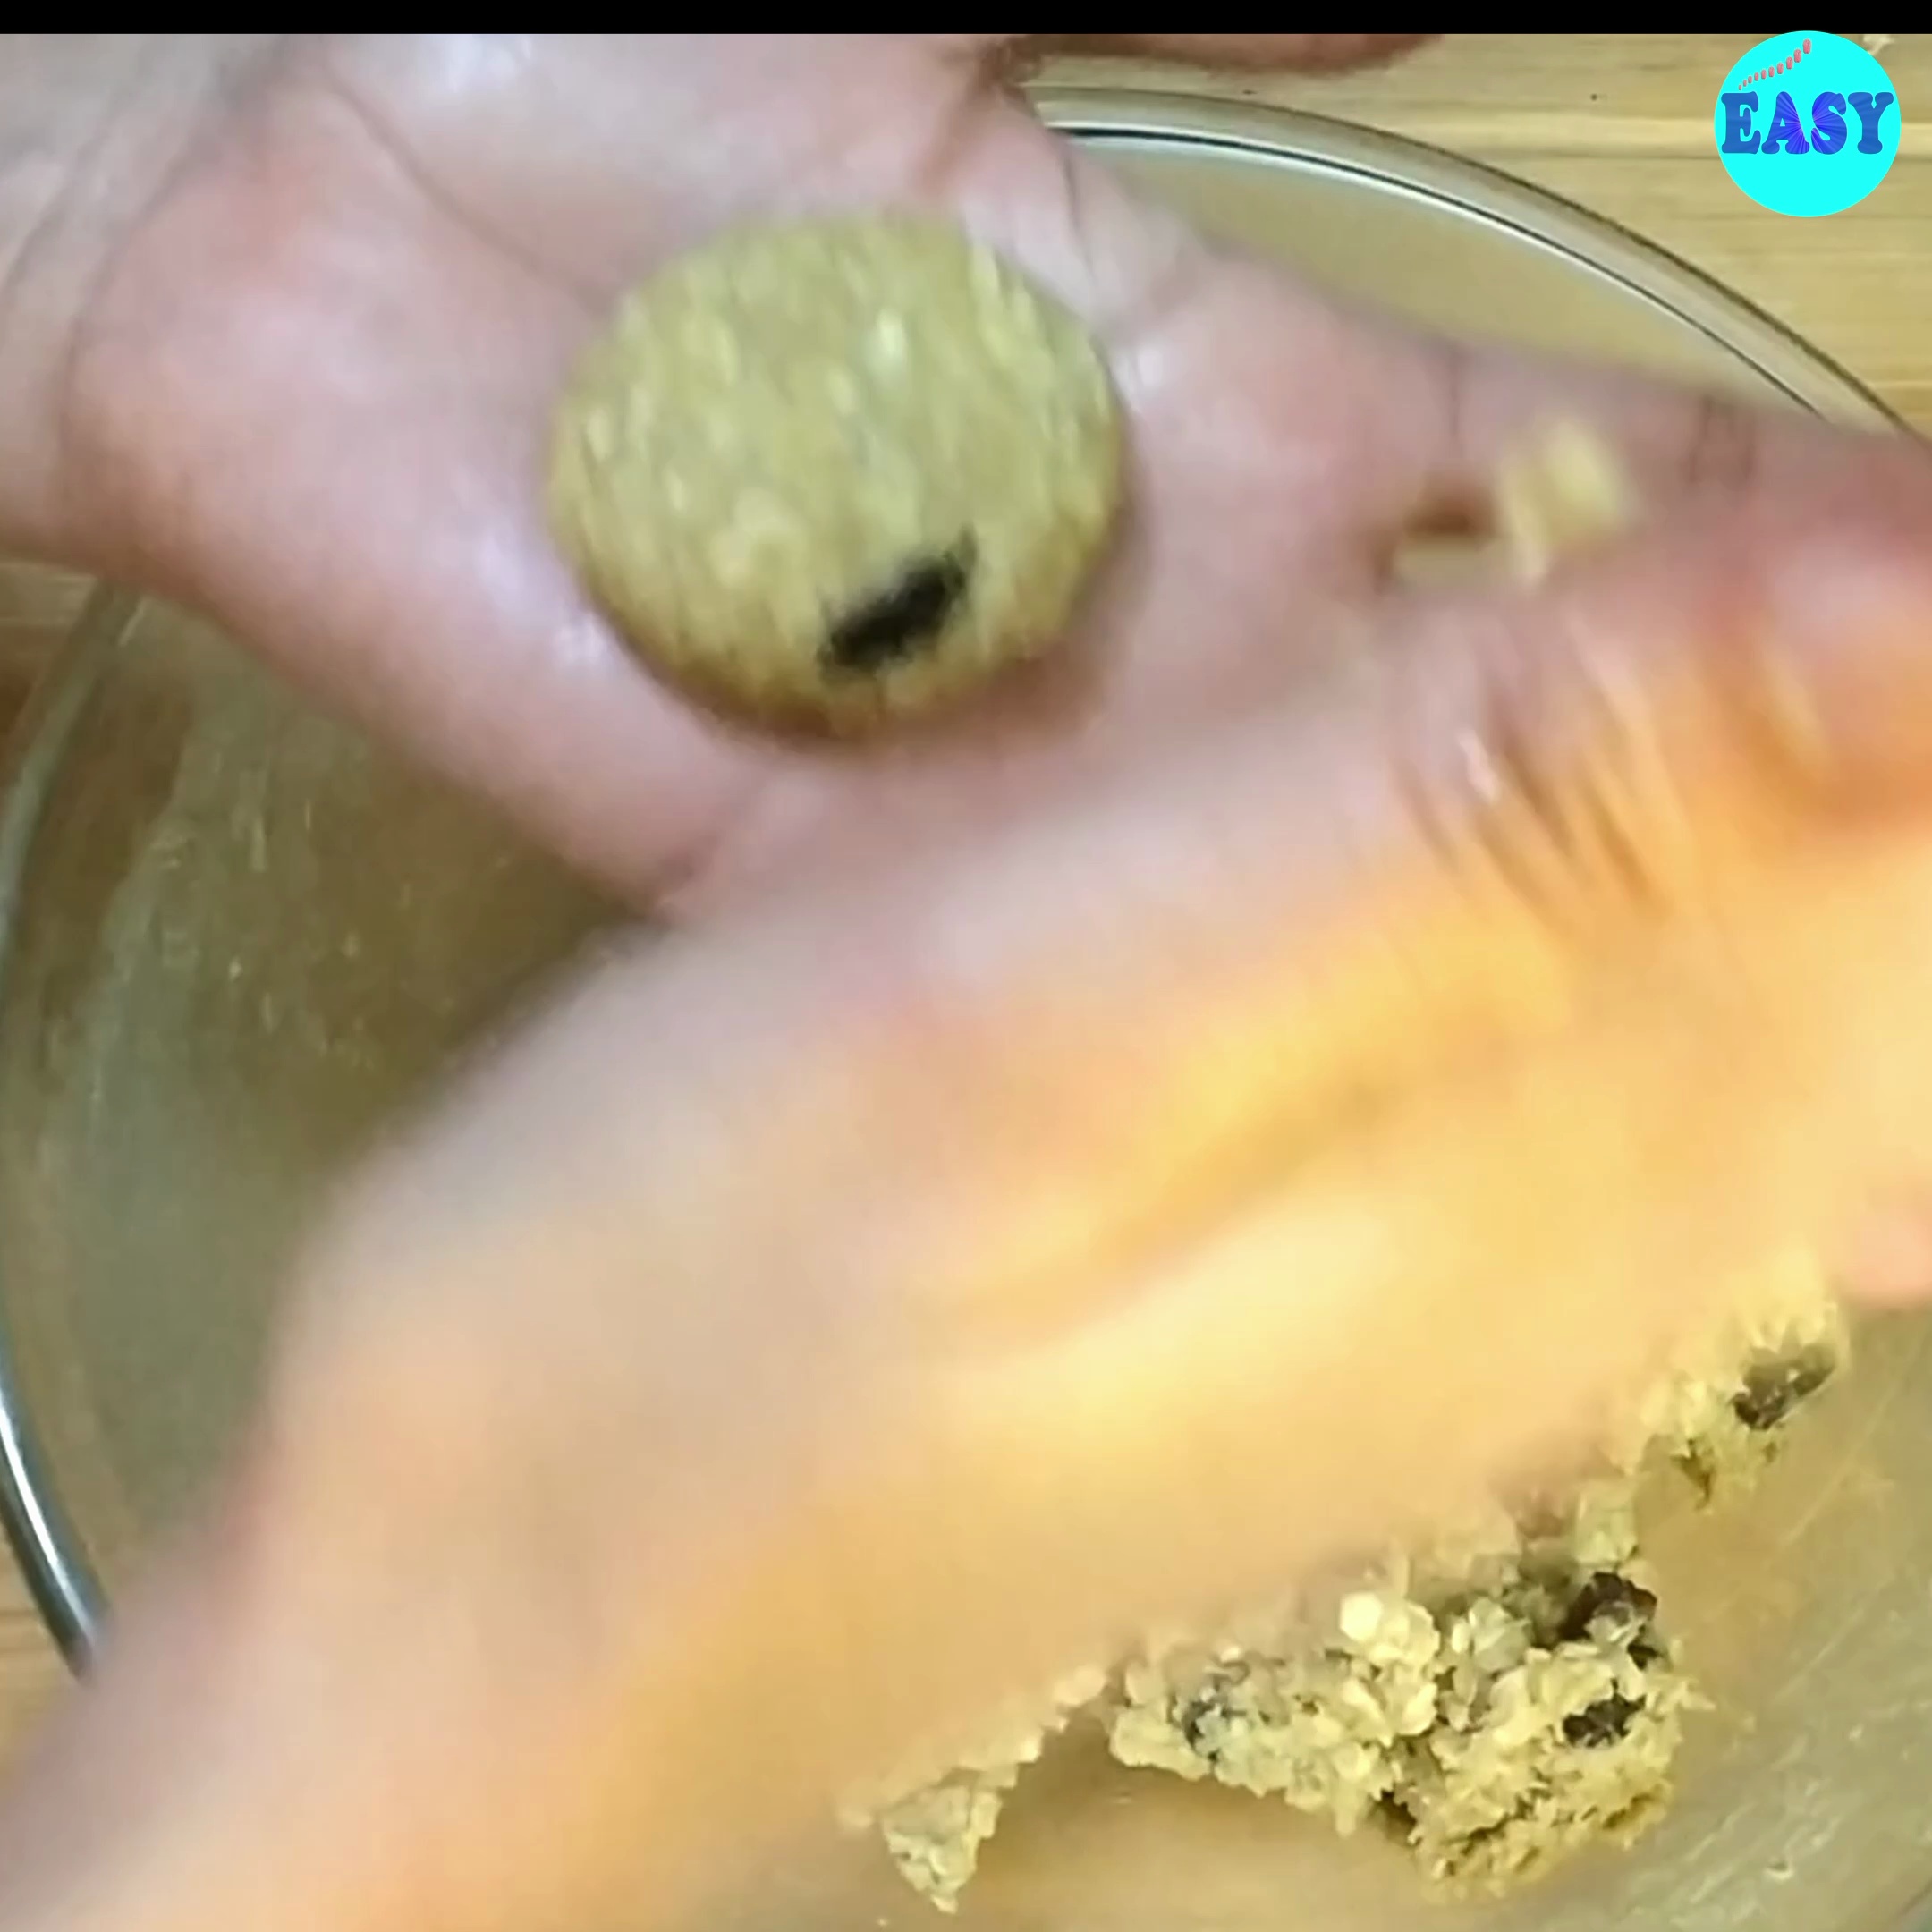 Step 6 - Take a small portion and roll it between your palms to save the cookie.